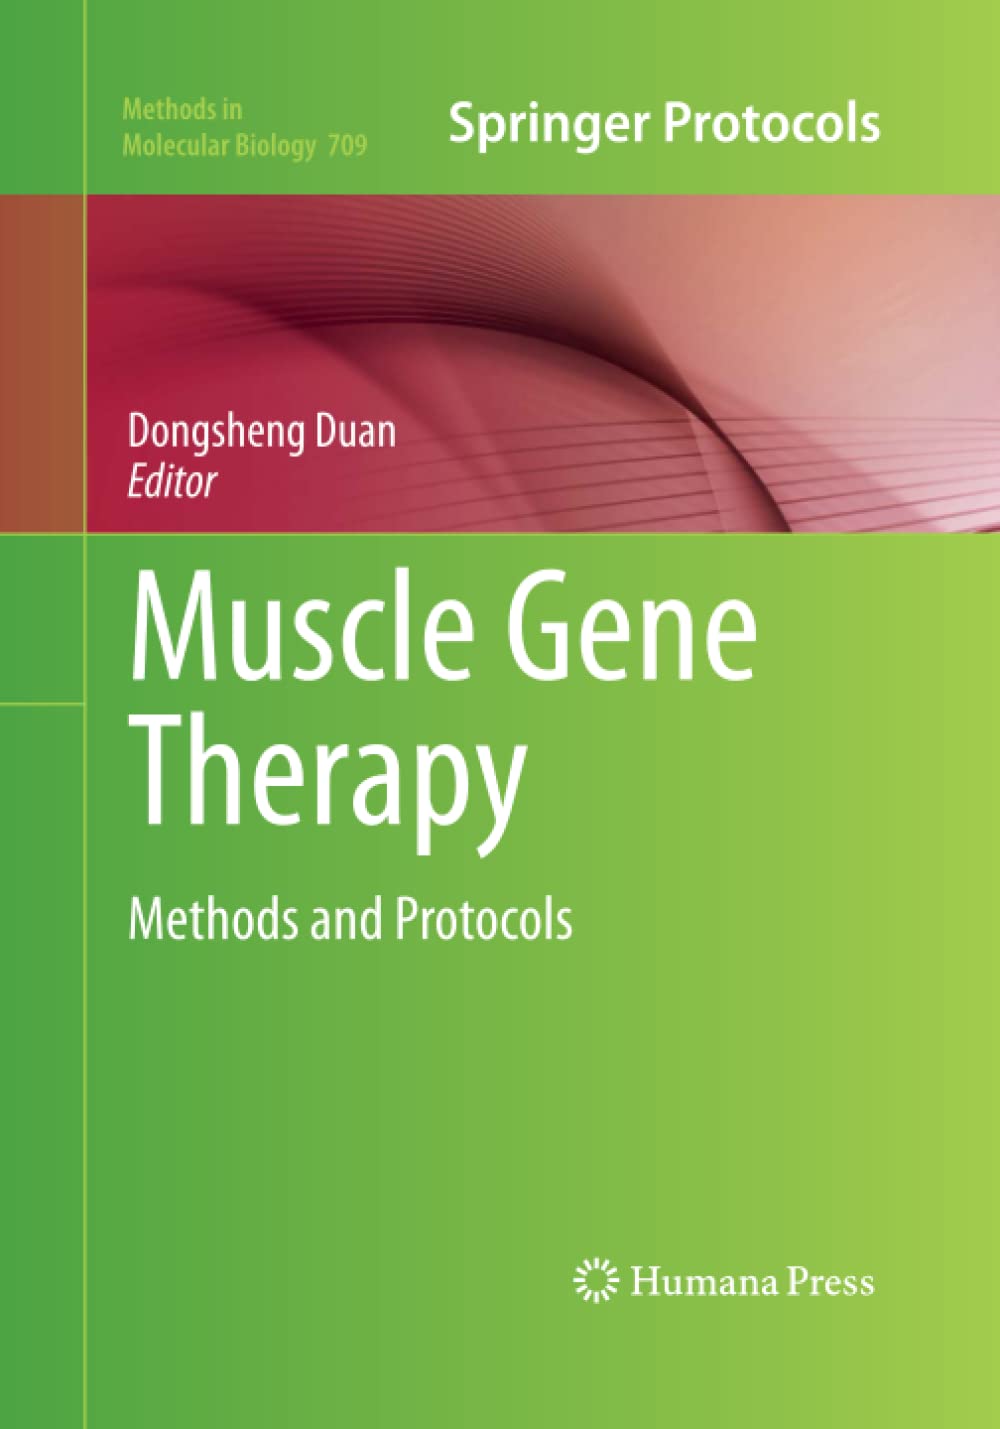 Muscle Gene Therapy: Methods and Protocols (Methods in Molecular Biology, 709)